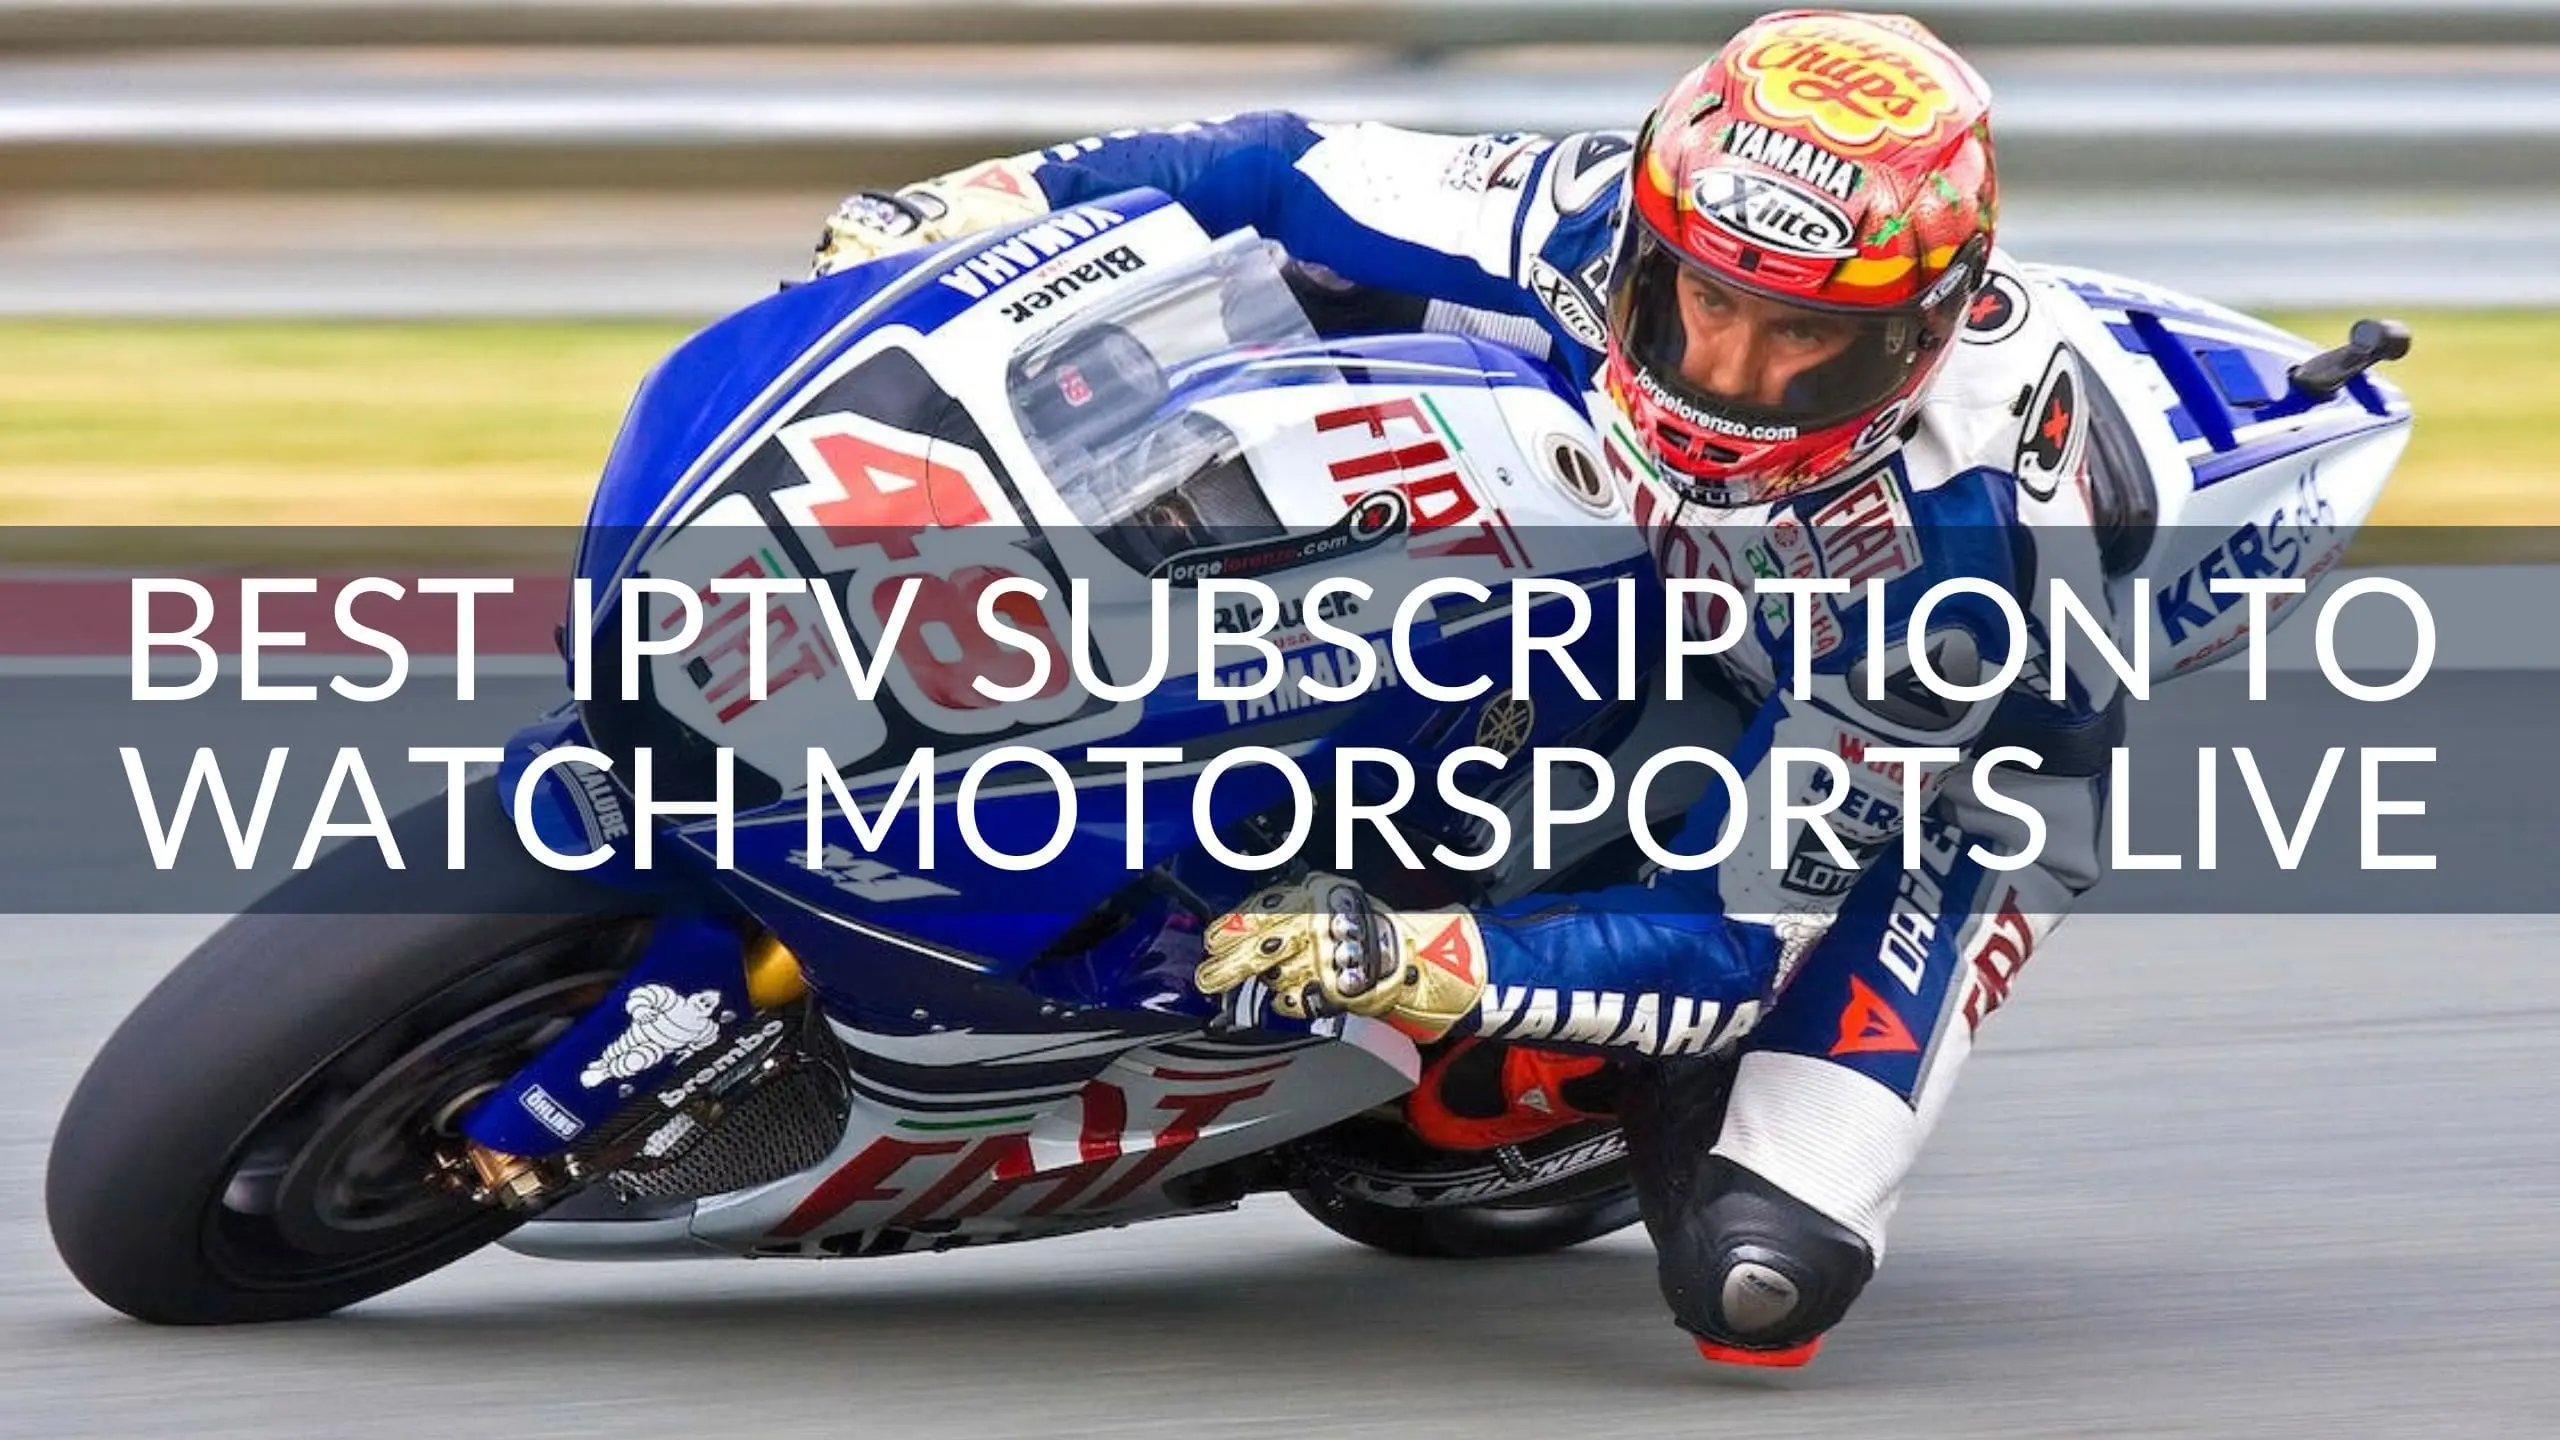 Best IPTV Subscription to Watch Motorsports Live